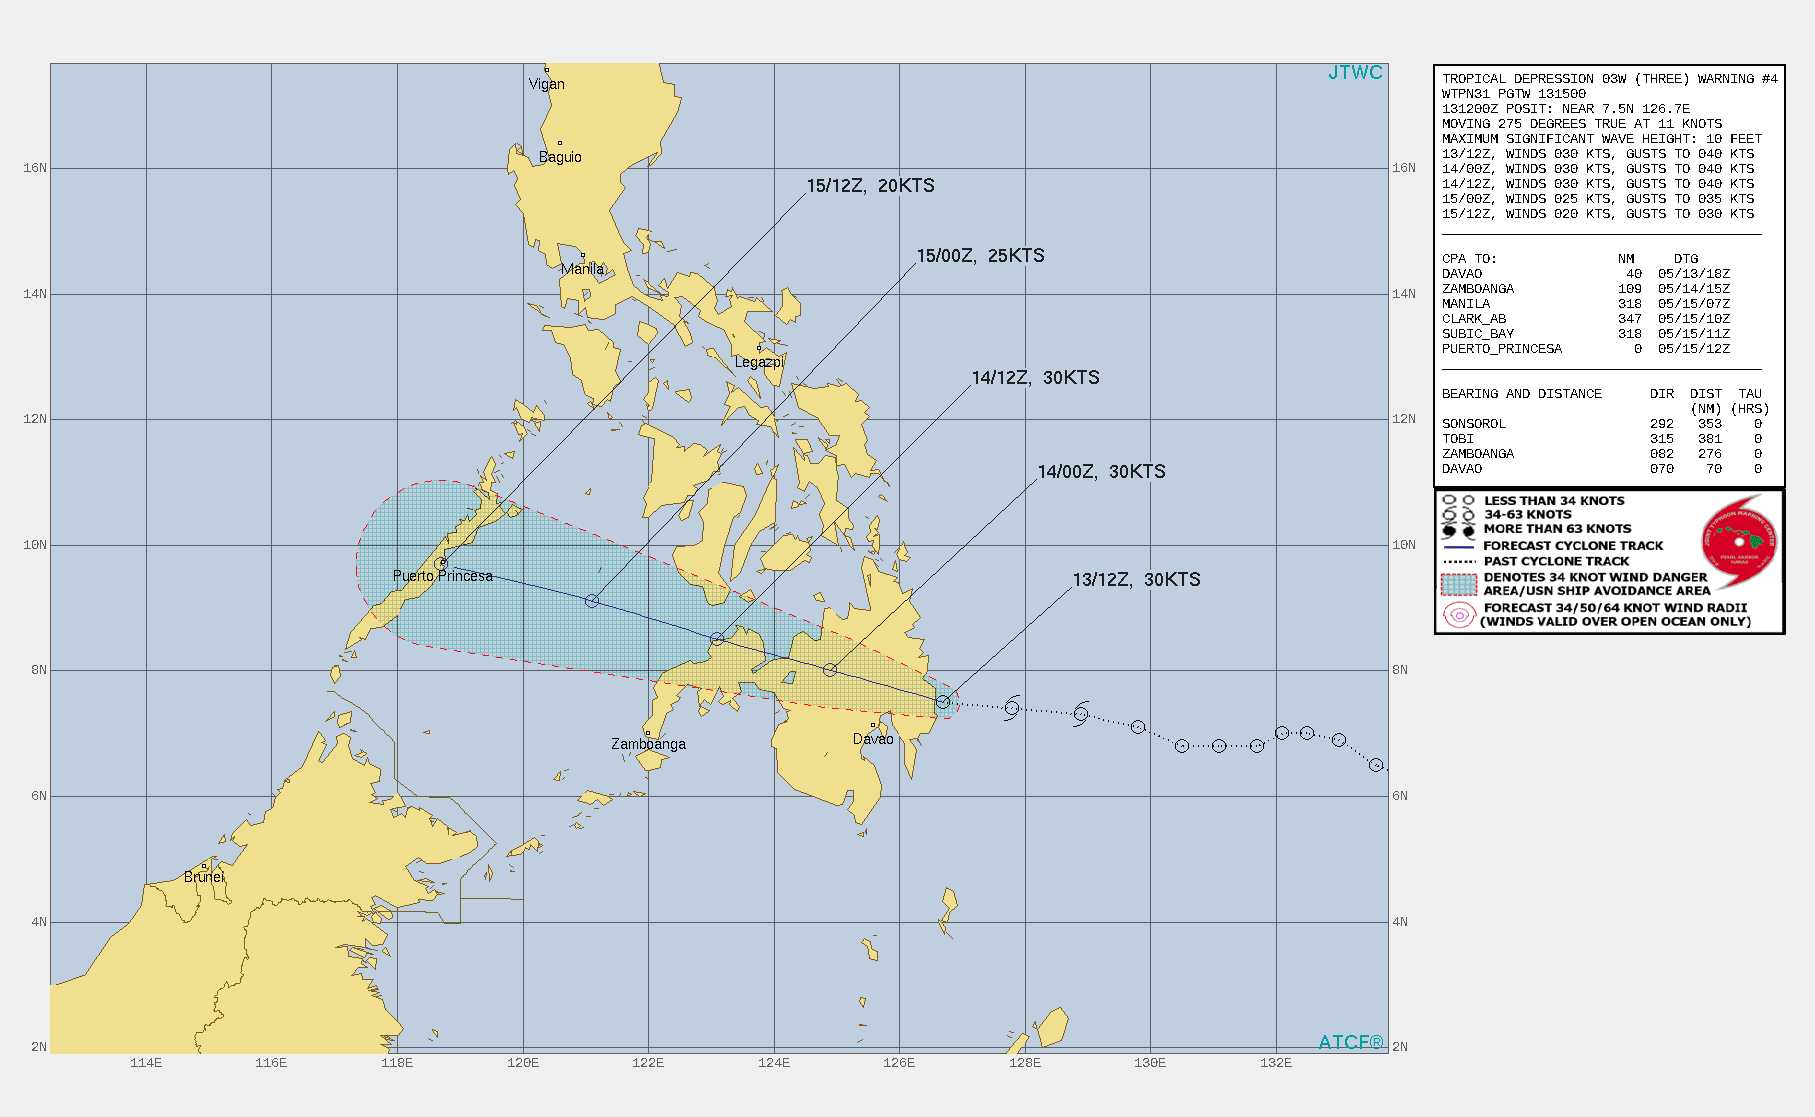 TD 03W. WARNING 4 ISSUED AT 13/15UTC.ANIMATED ENHANCED INFRARED SATELLITE IMAGERY(EIR) DEPICTS A FULLY-EXPOSED LOW-LEVEL CIRCULATION  DISPLACED WEST OF AN ISOLATED DEEP CONVECTIVE BURST. EIR  SUPPORTS THE INITIAL POSITION WITH GOOD CONFIDENCE AND INDICATES  THAT THE SYSTEM IS CURRENTLY MAKING LANDFALL OVER SOUTHEAST  MINDANAO.ENVIRONMENTAL ANALYSIS INDICATES A MARGINALLY-FAVORABLE  ENVIRONMENT WITH LOW VERTICAL WIND SHEAR (VWS), WEAK POLEWARD  OUTFLOW AND WARM SST VALUES (29C). TD 03W IS TRACKING WESTWARD ALONG  THE SOUTHERN PERIPHERY OF A LOW- TO MID-LEVEL SUBTROPICAL RIDGE  (STR) ENTRENCHED TO THE NORTH.TD 03W IS FORECAST TO TRACK WESTWARD TO WEST-NORTHWESTWARD  THROUGH THE FORECAST PERIOD UNDER THE STEERING INFLUENCE OF THE STR  POSITIONED TO THE NORTH. TD 03W IS EXPECTED TO WEAKEN AS IT TRACKS OVER MINDANAO, AND WILL  DISSIPATE BY 48H DUE TO INCREASING VWS (20-25 KNOTS) AND UPPER- LEVEL CONVERGENCE ASSOCIATED WITH A PERSISTENT UPPER-LEVEL TROUGH.